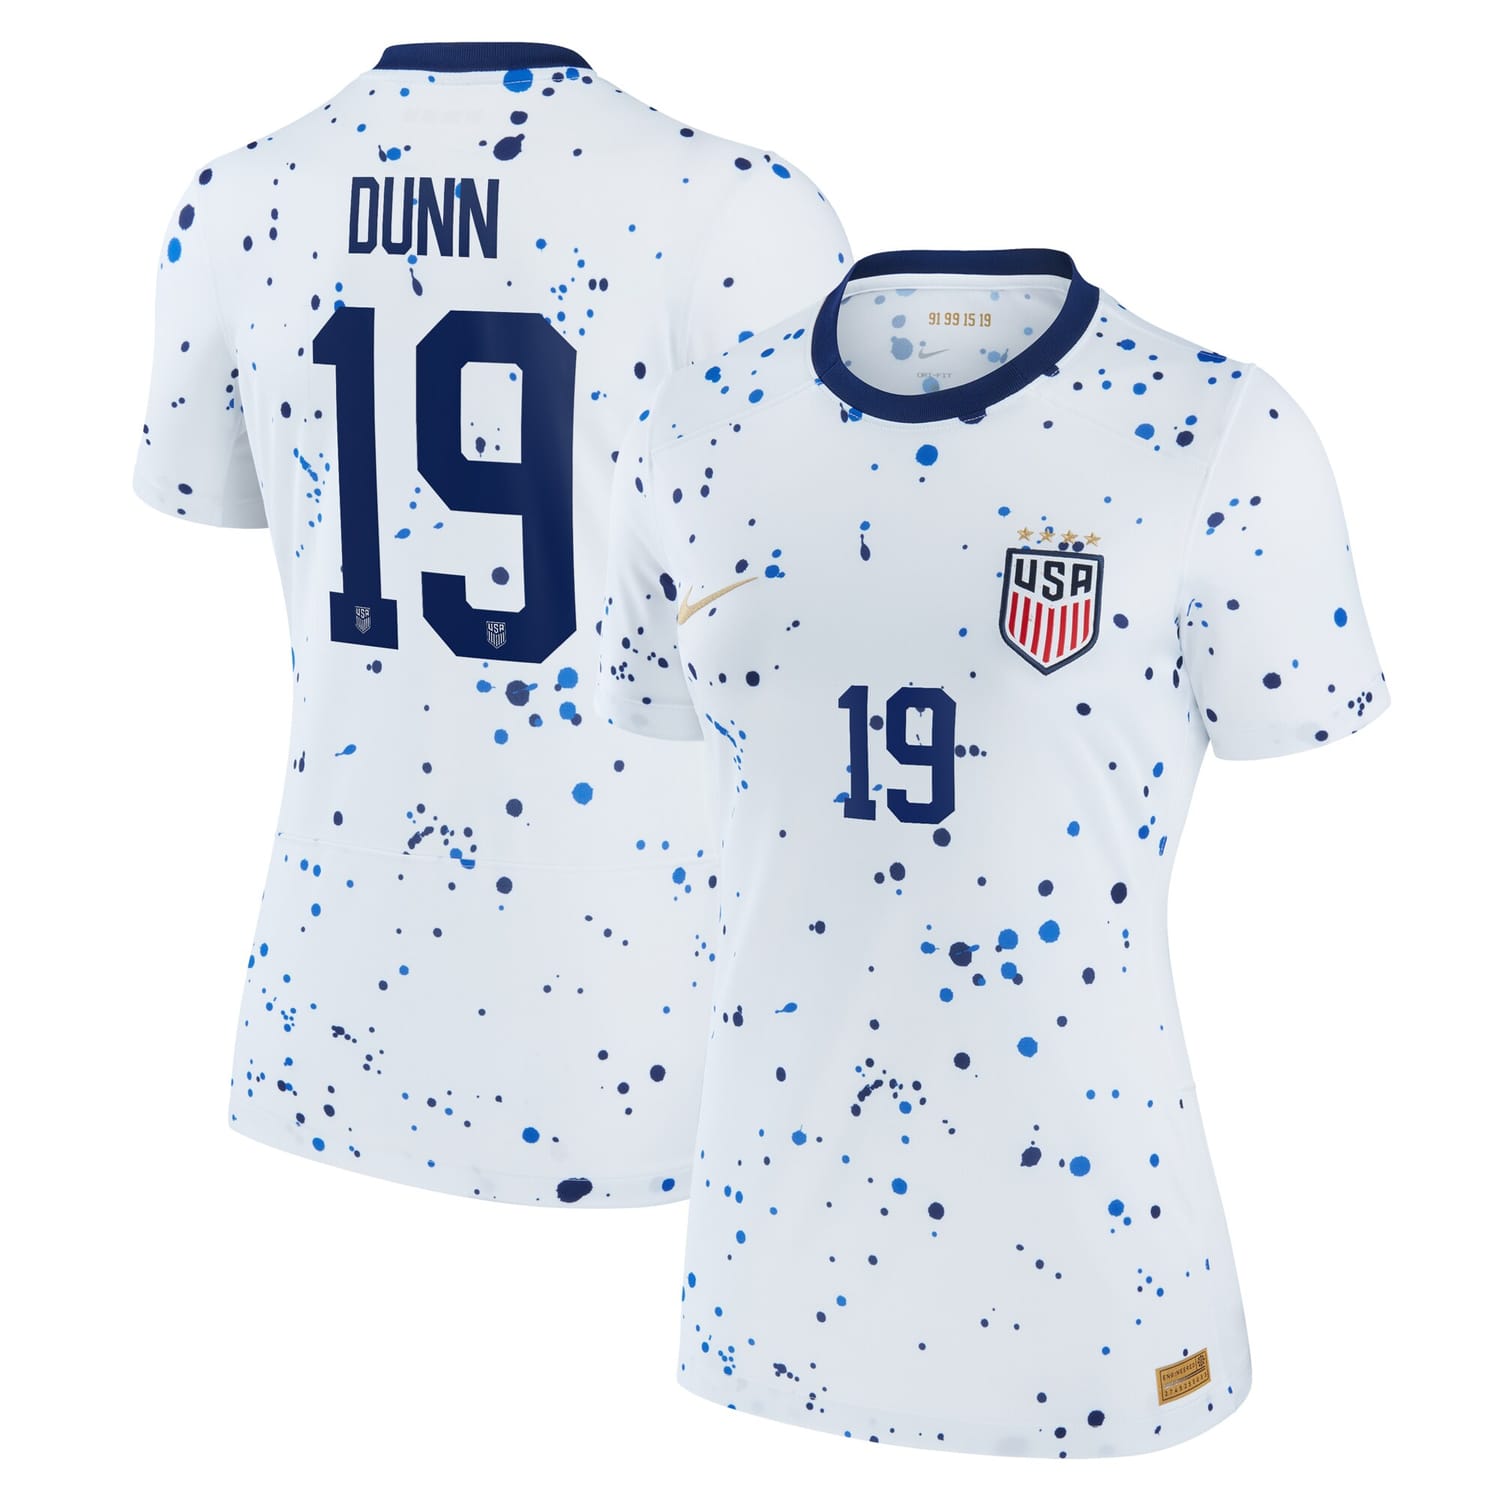 USWNT Home Jersey Shirt White 2023 player Crystal Dunn printing for Women